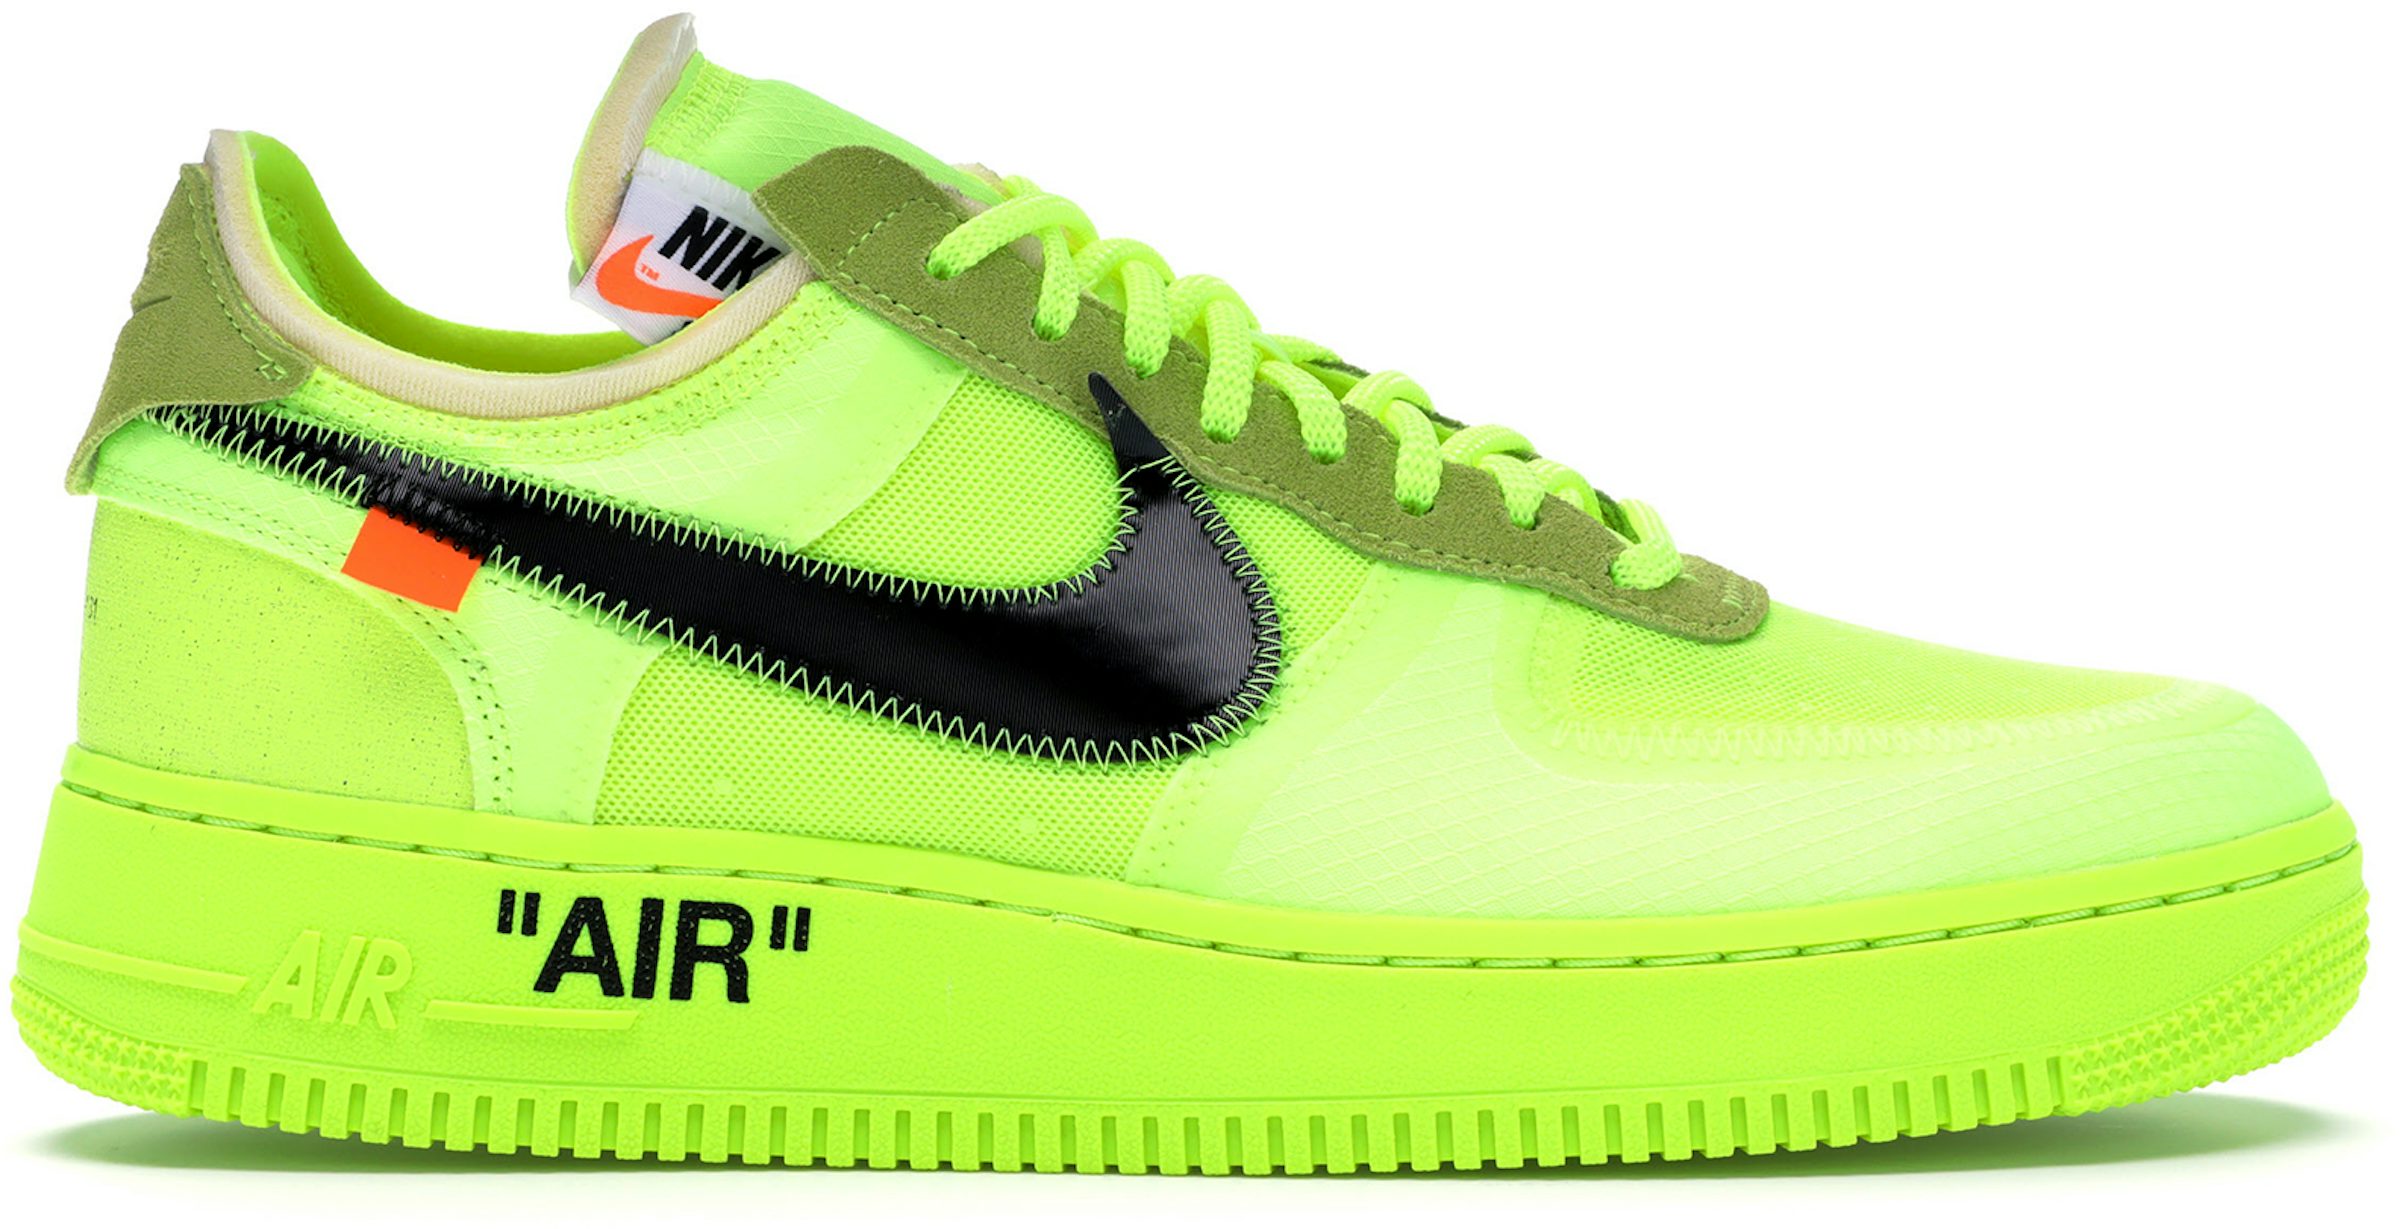 Nike Sportswear Air Force 1 Trainers green/offwhite, Men's, Size: 16, green/off-white - Leather and Textile